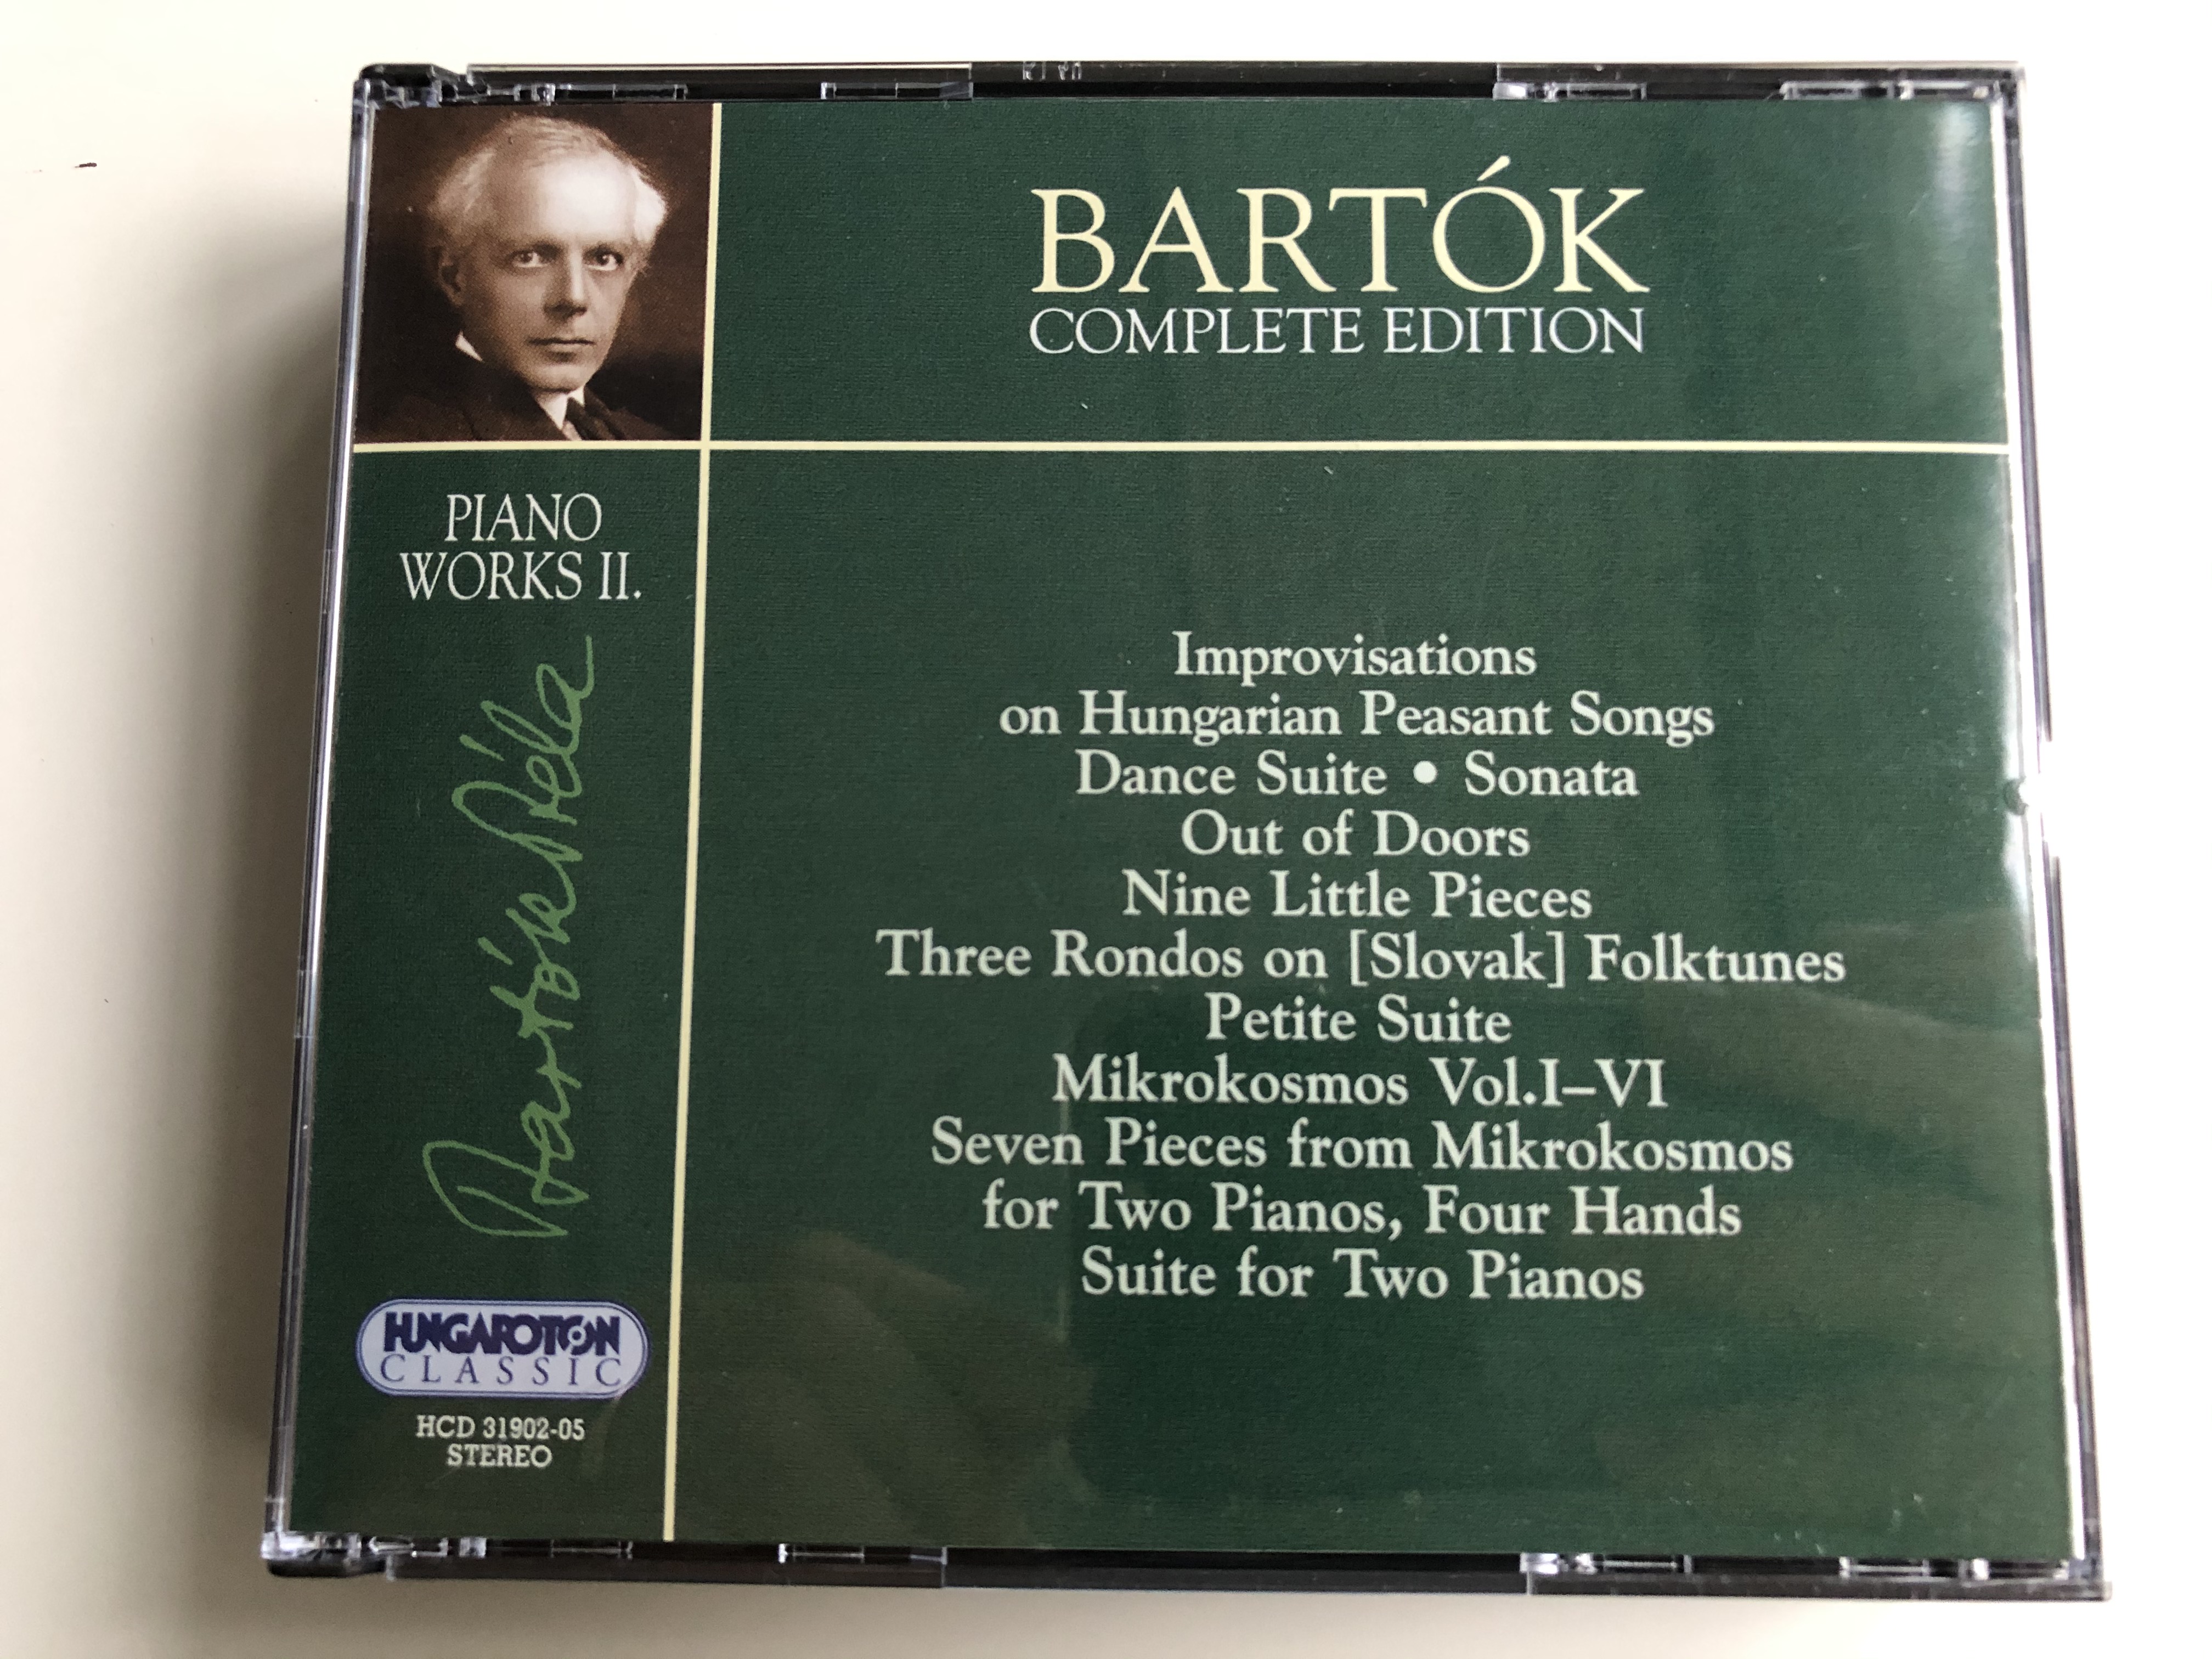 bartok-complete-edition-piano-works-ii.-improvisations-of-hungarian-peasant-songs-dance-suit-sonata-out-of-doors-nine-little-pieces-three-rondos-on-slovak-folktunes-hungaroton-classic-4x-1-.jpg